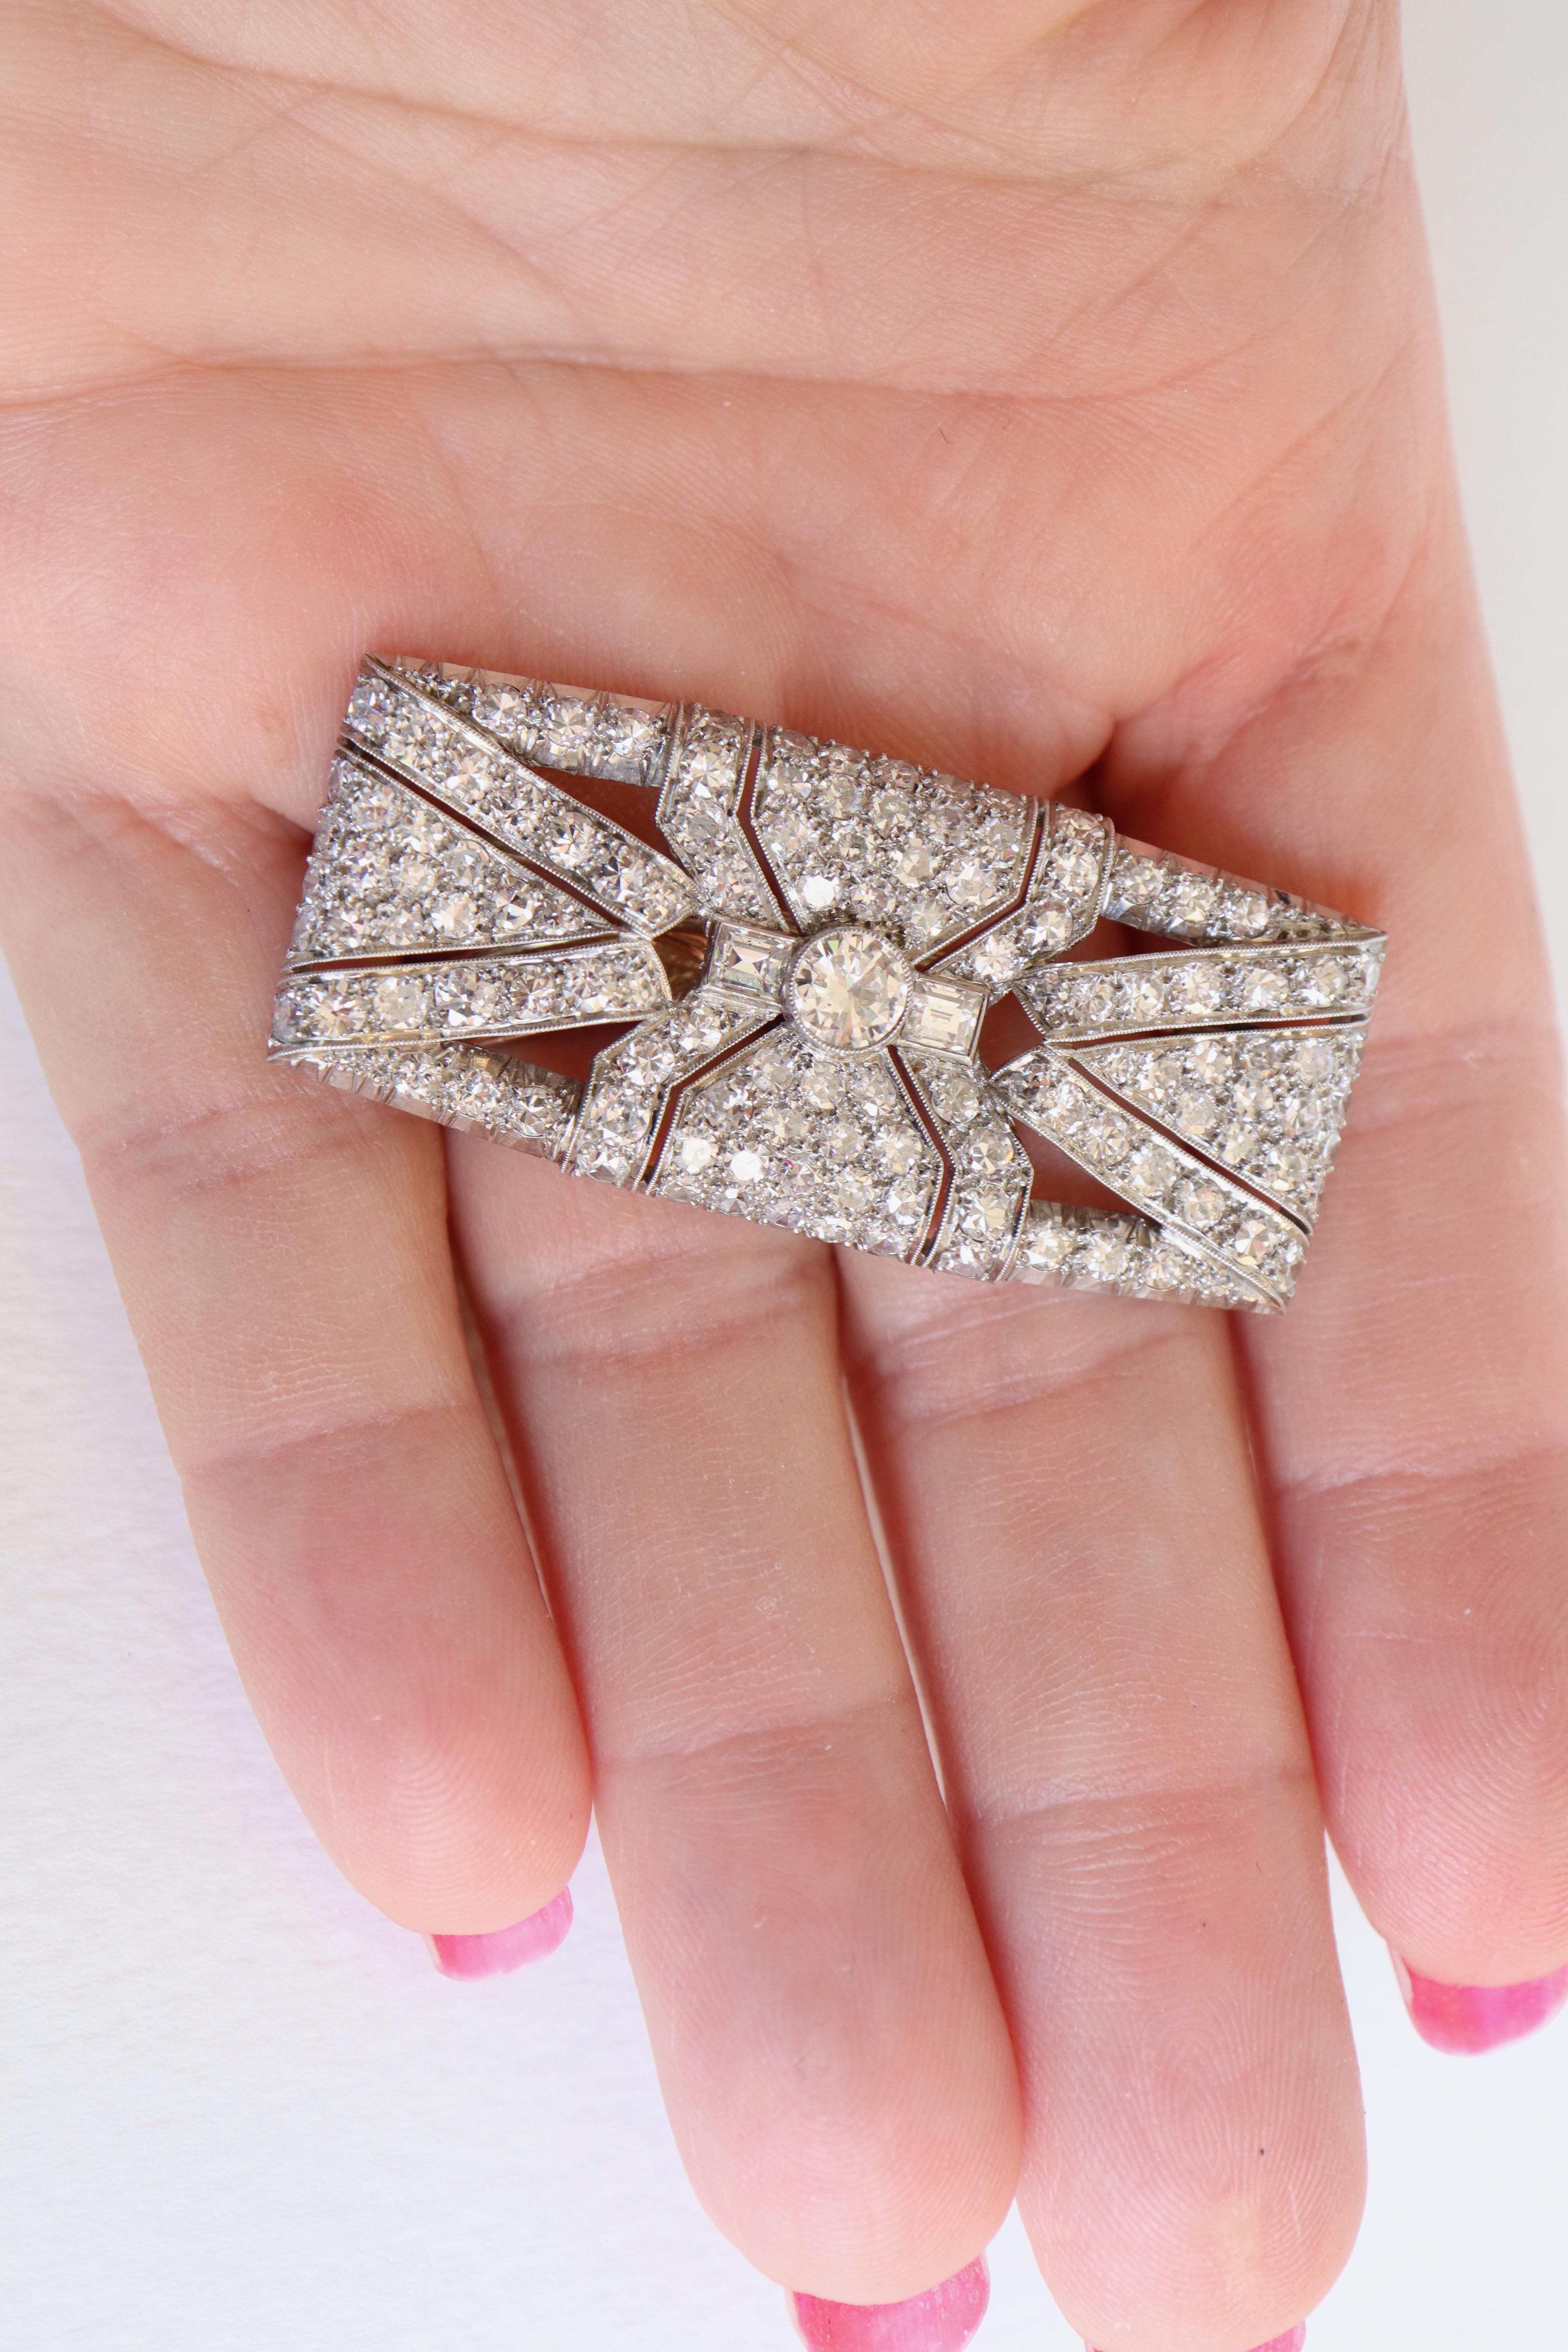 Art Deco Brooch circa 1930 Diamonds Platinum 950 and 18 Carat White Gold In Good Condition For Sale In Paris, FR